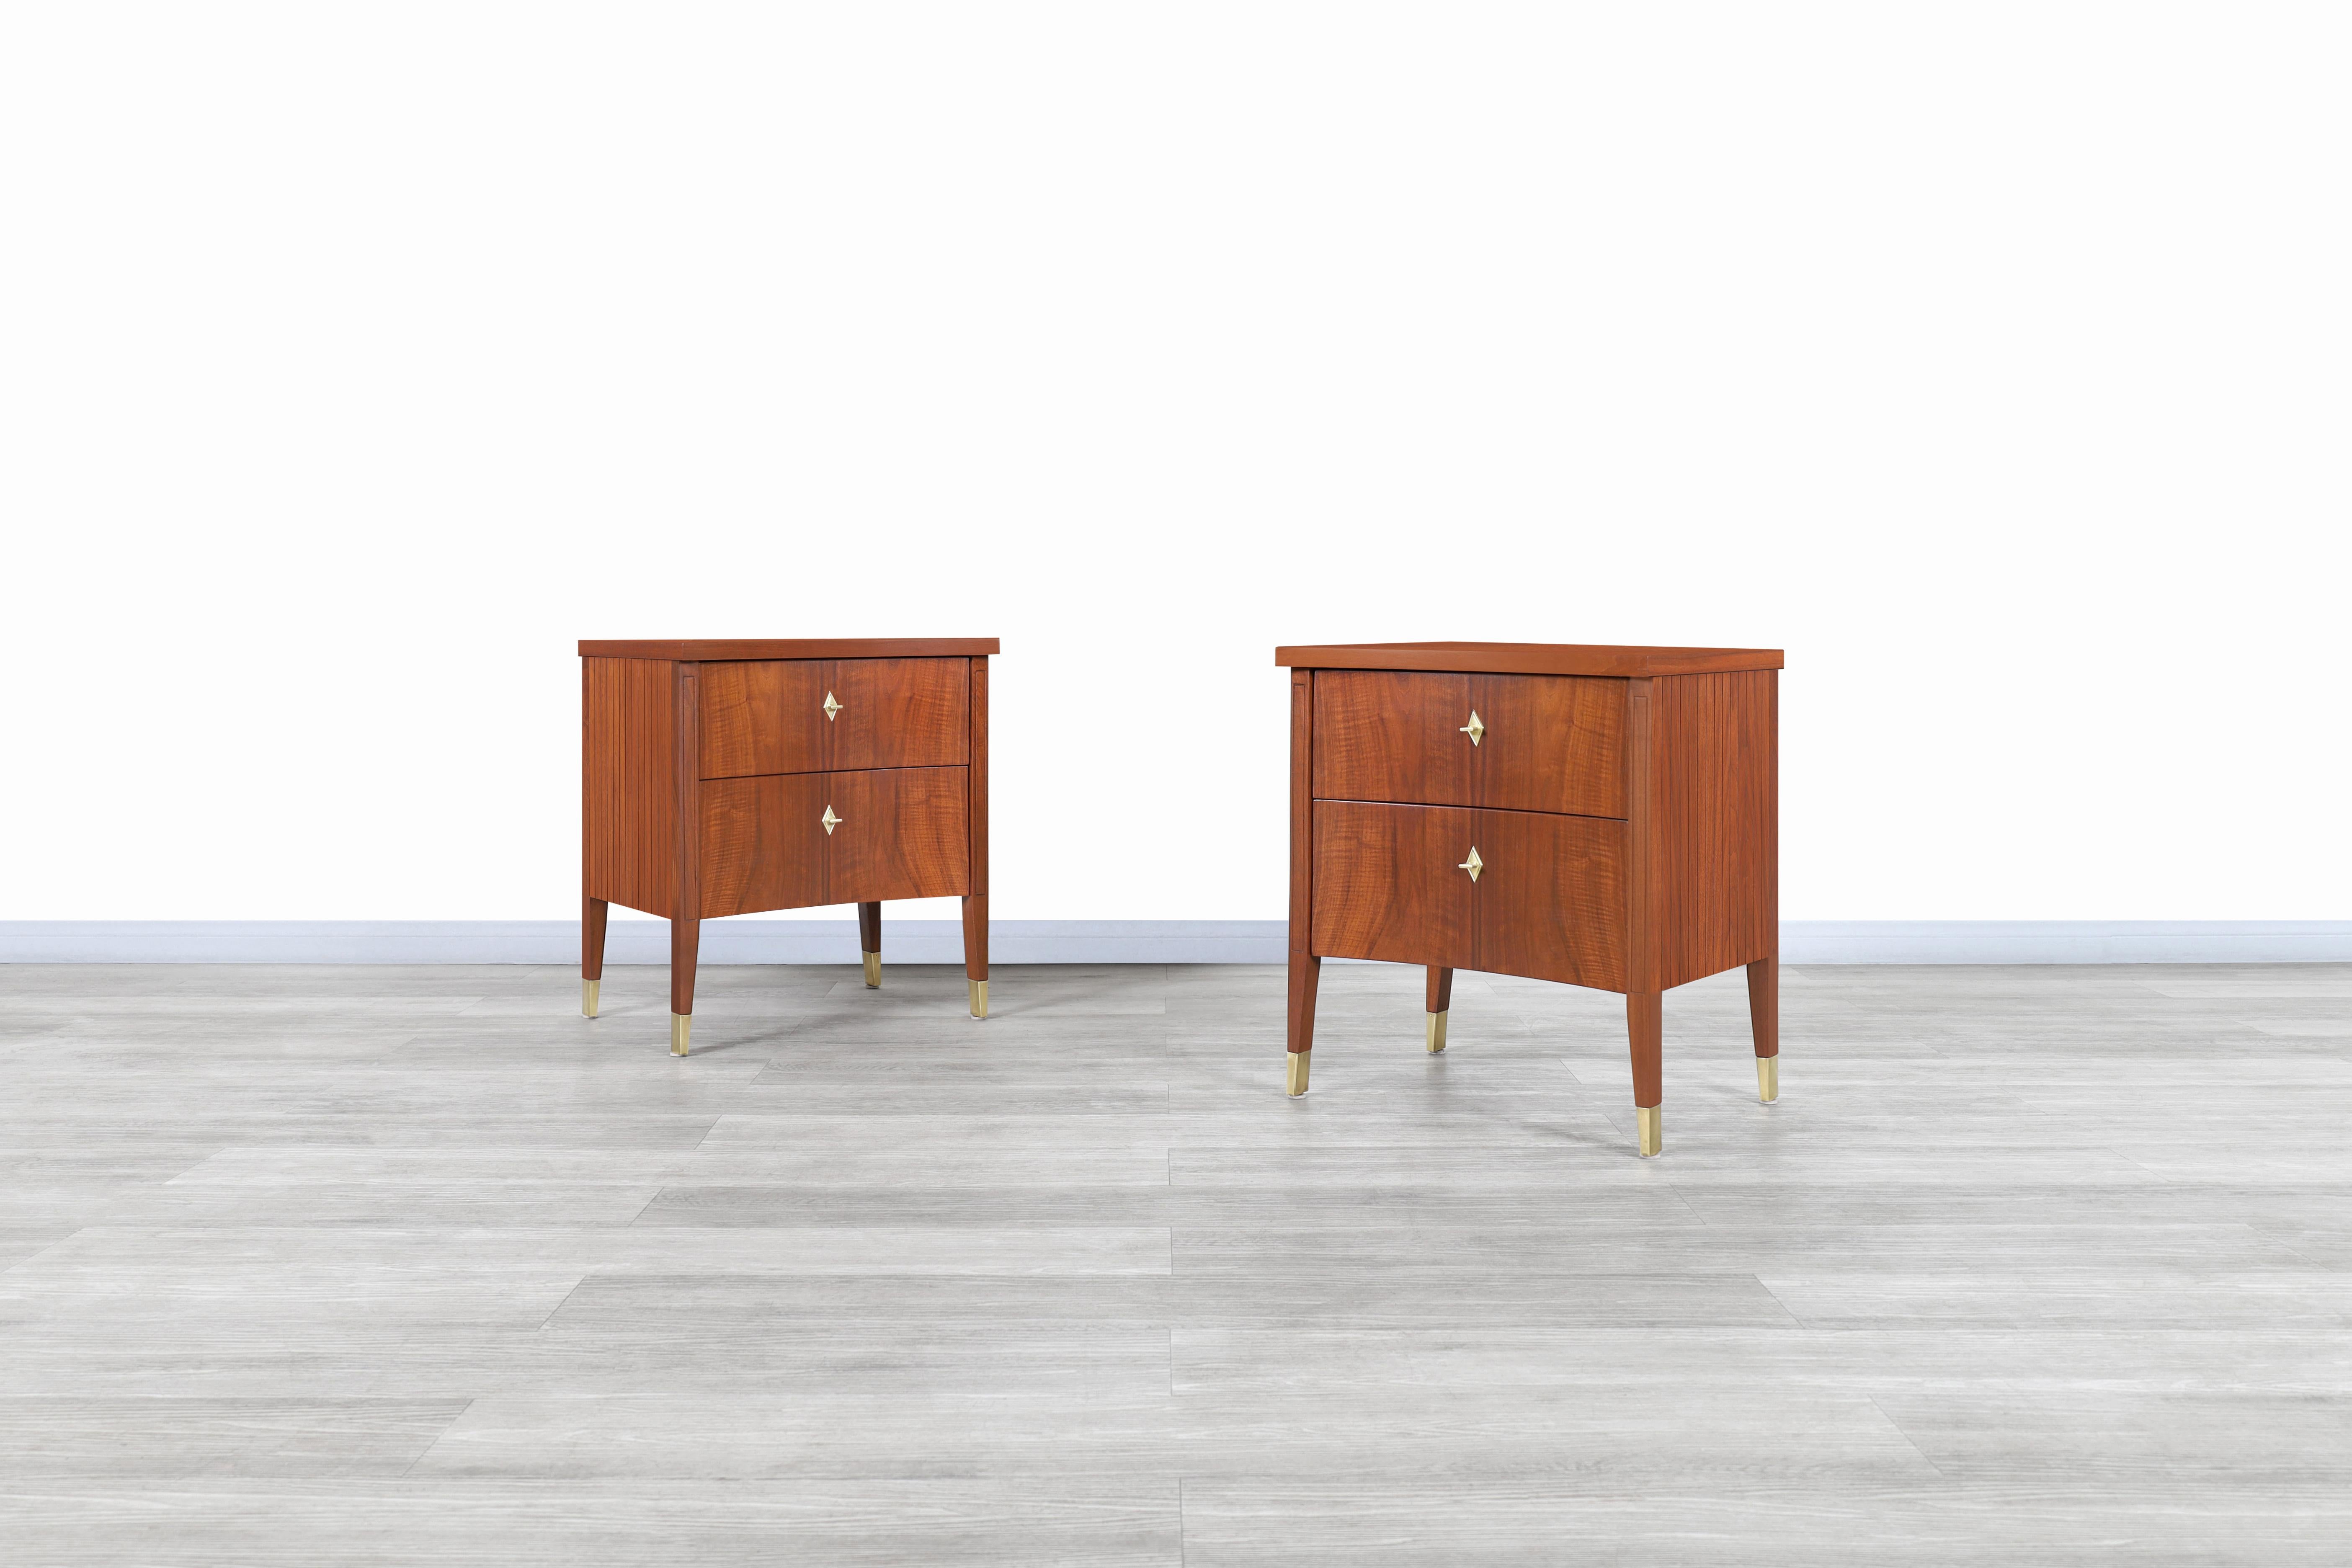 Stunning vintage walnut curved nightstands designed and manufactured in the United States, circa 1950s. These nightstands feature a curved design throughout their structure, allowing them to stand out from the rest while offering a unique view from